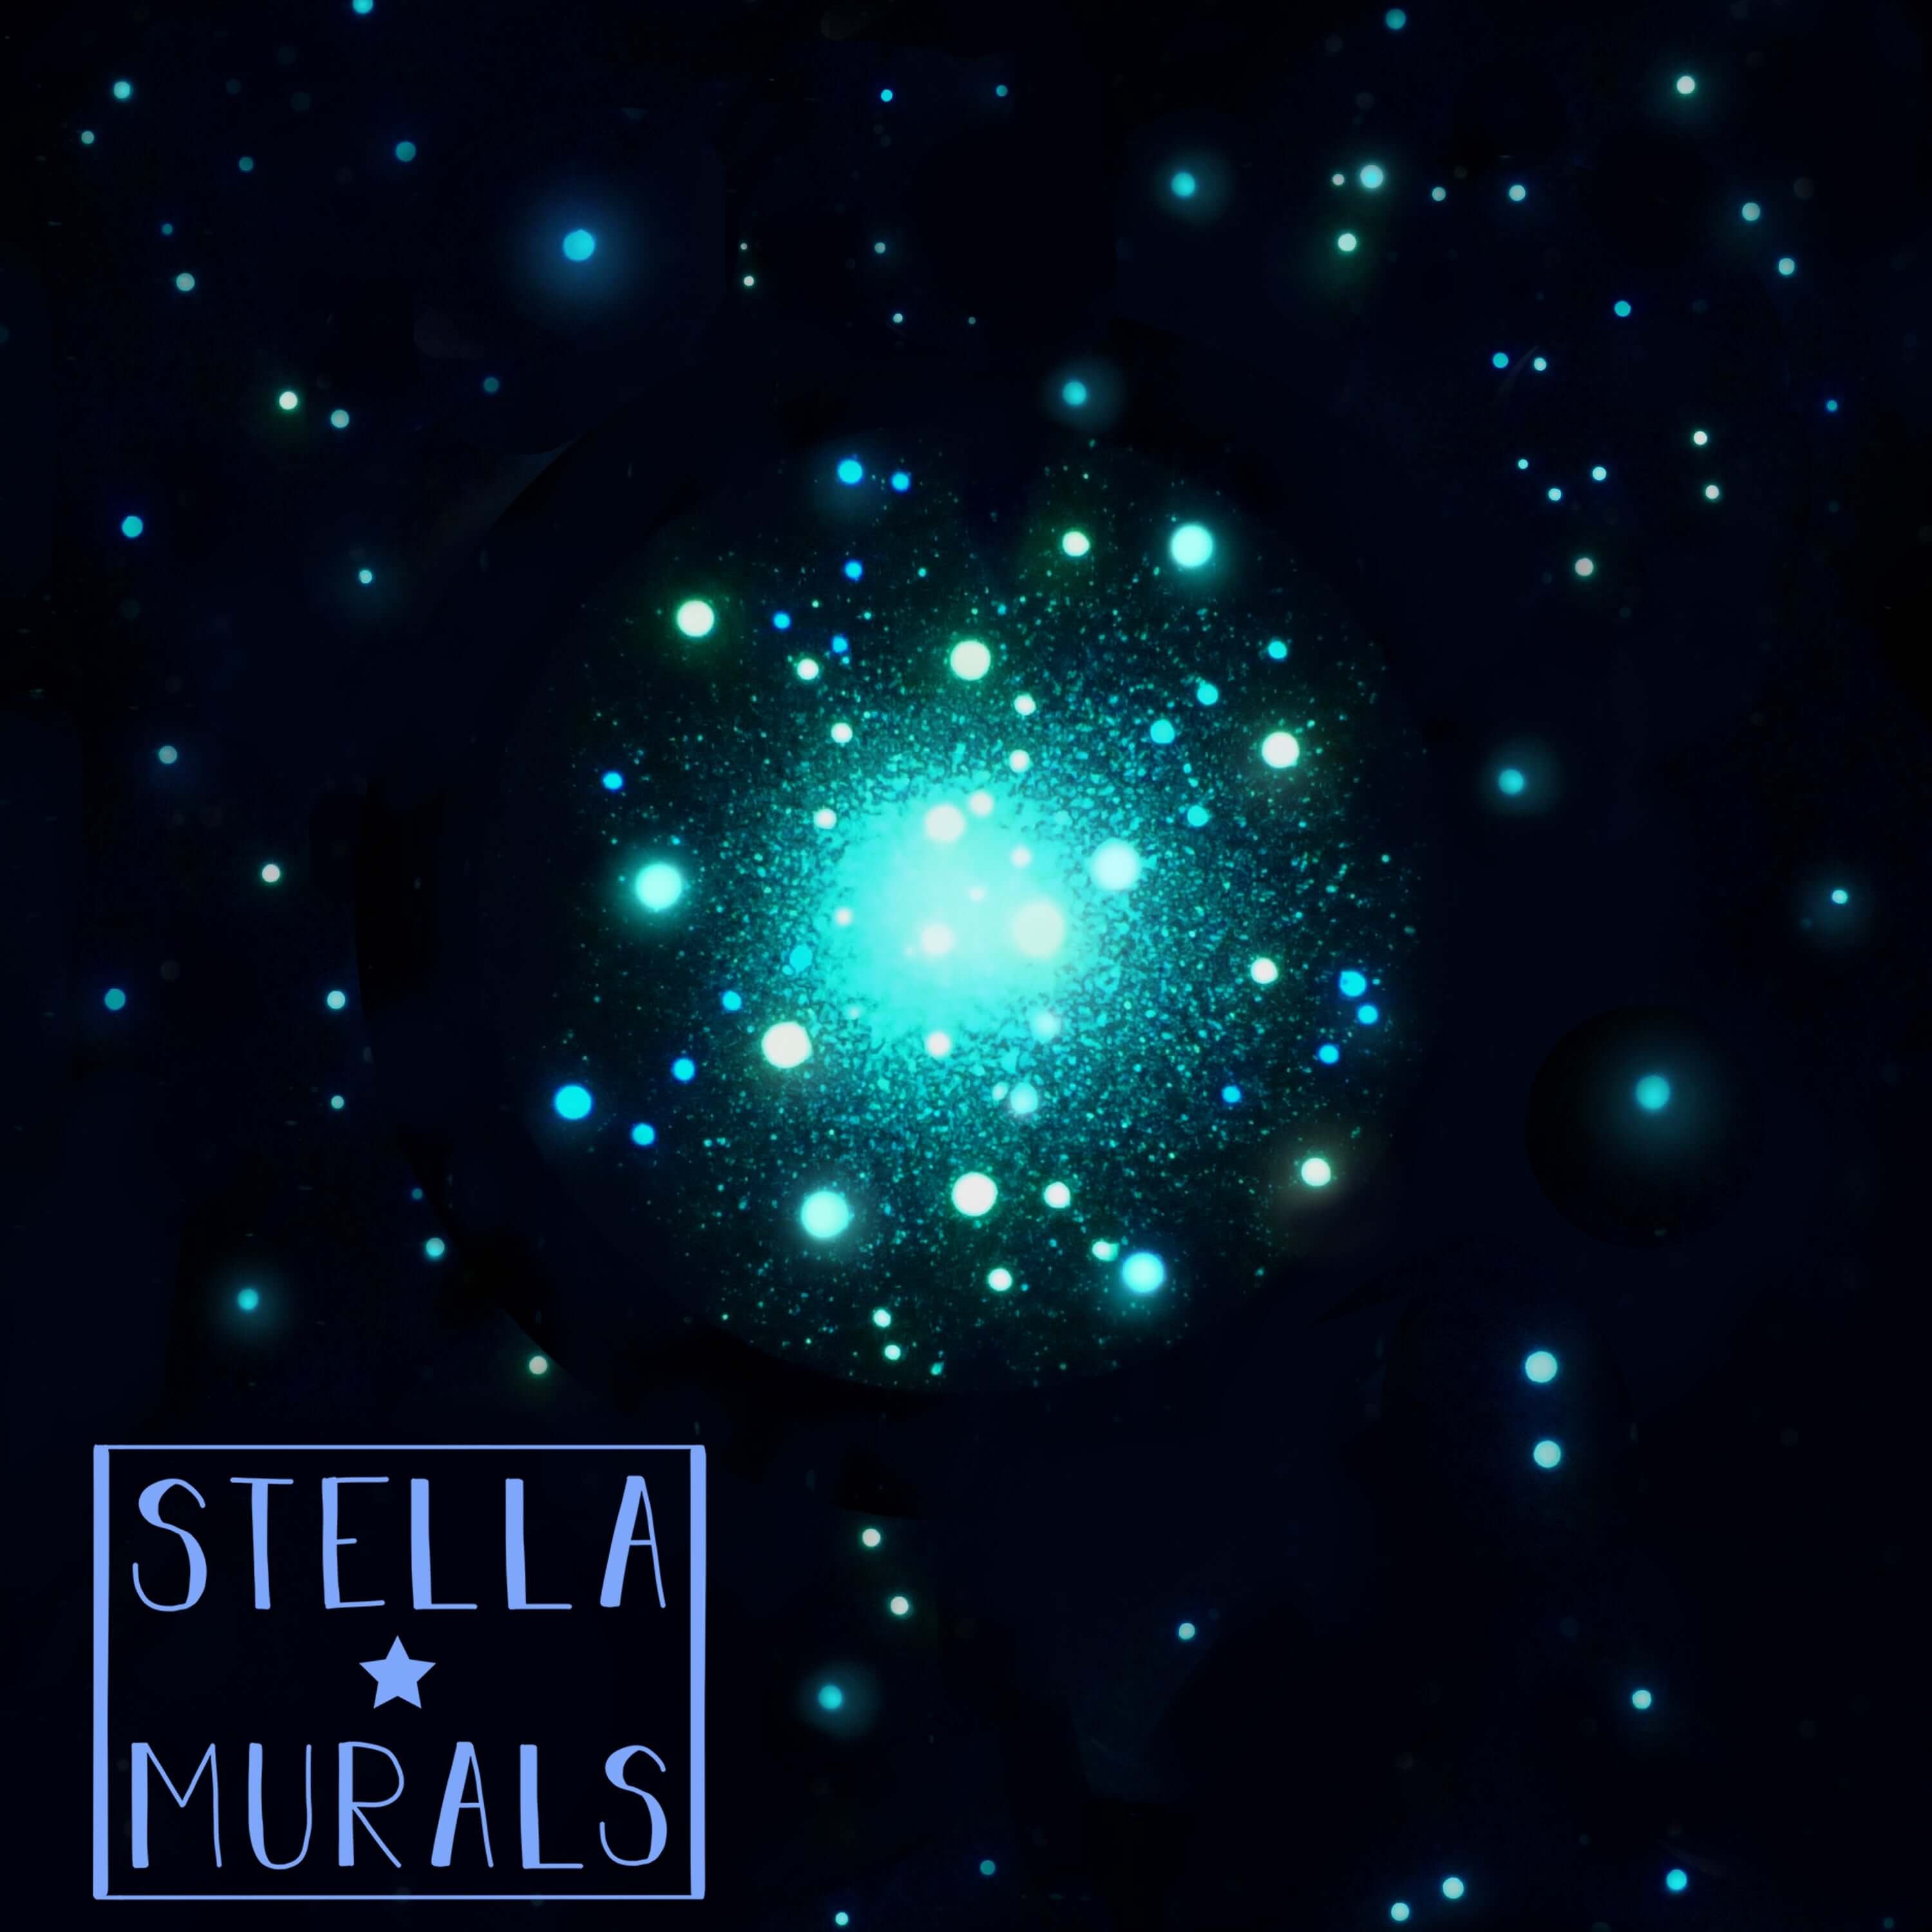 Photoluminescent star cluster decal, radiating a gentle glow in the dark.